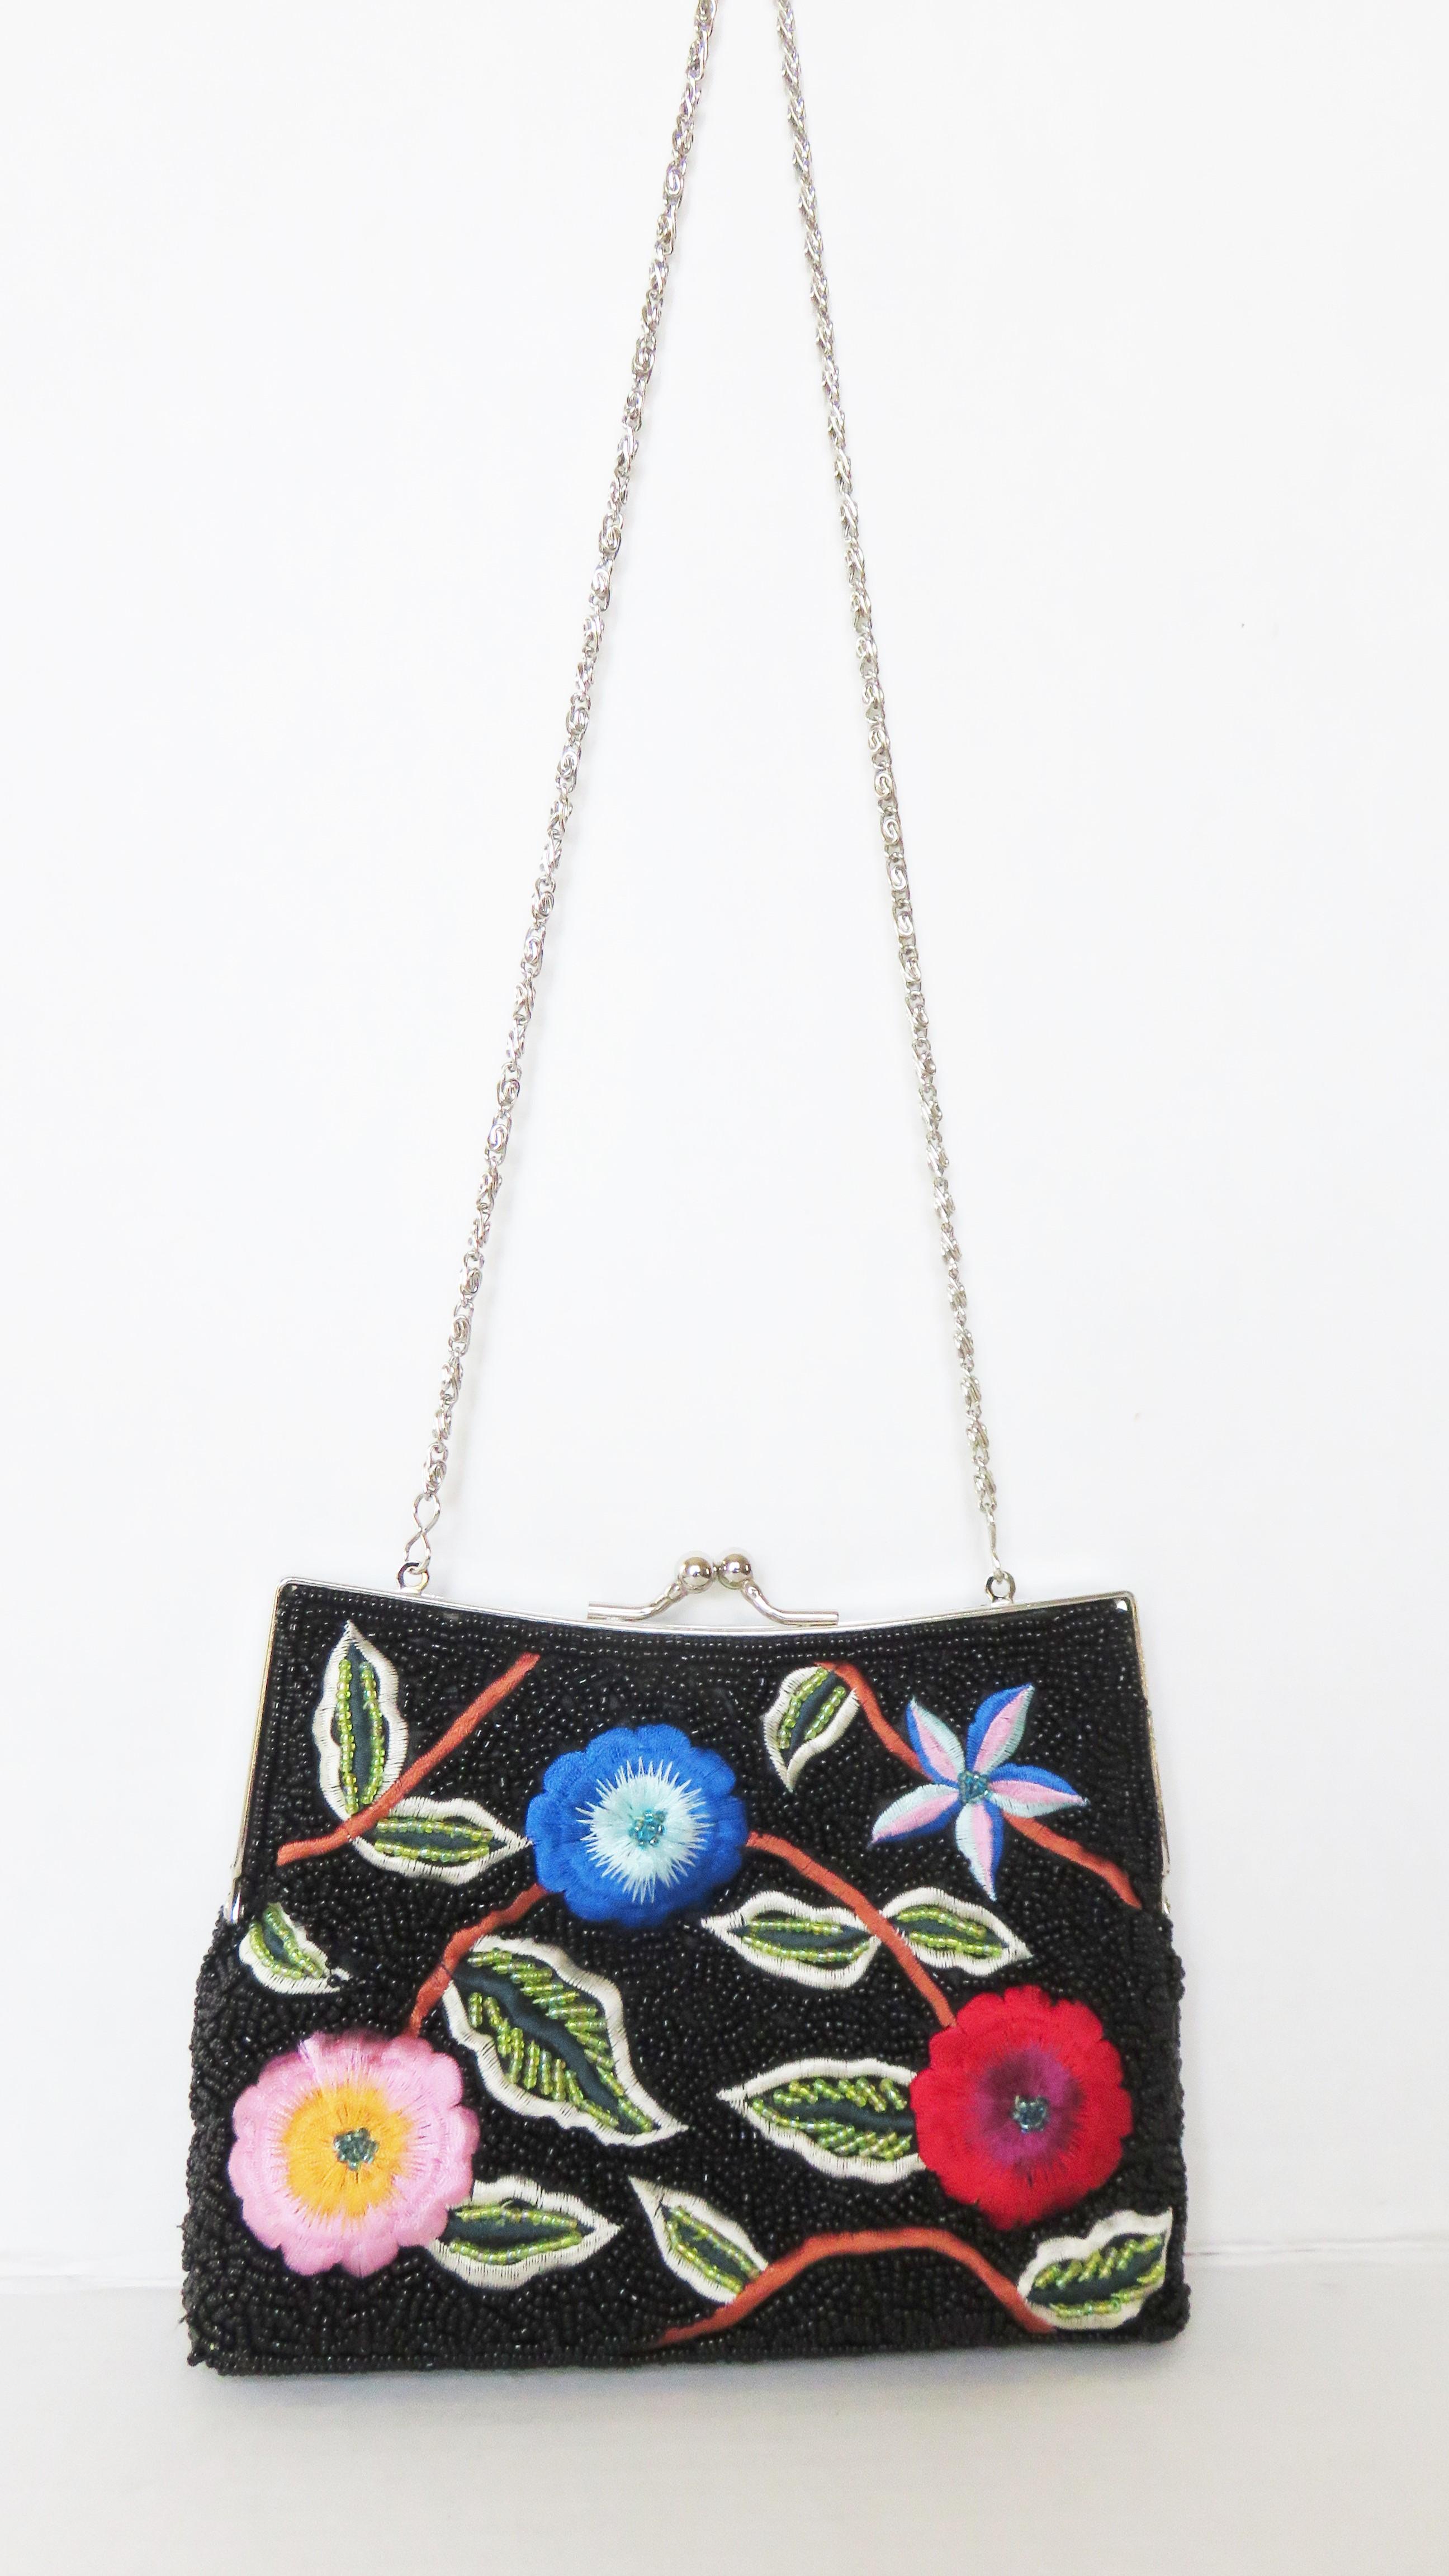 Beaded and Embroidery Clutch with Optional Chain Shoulder Strap 1980s For Sale 1